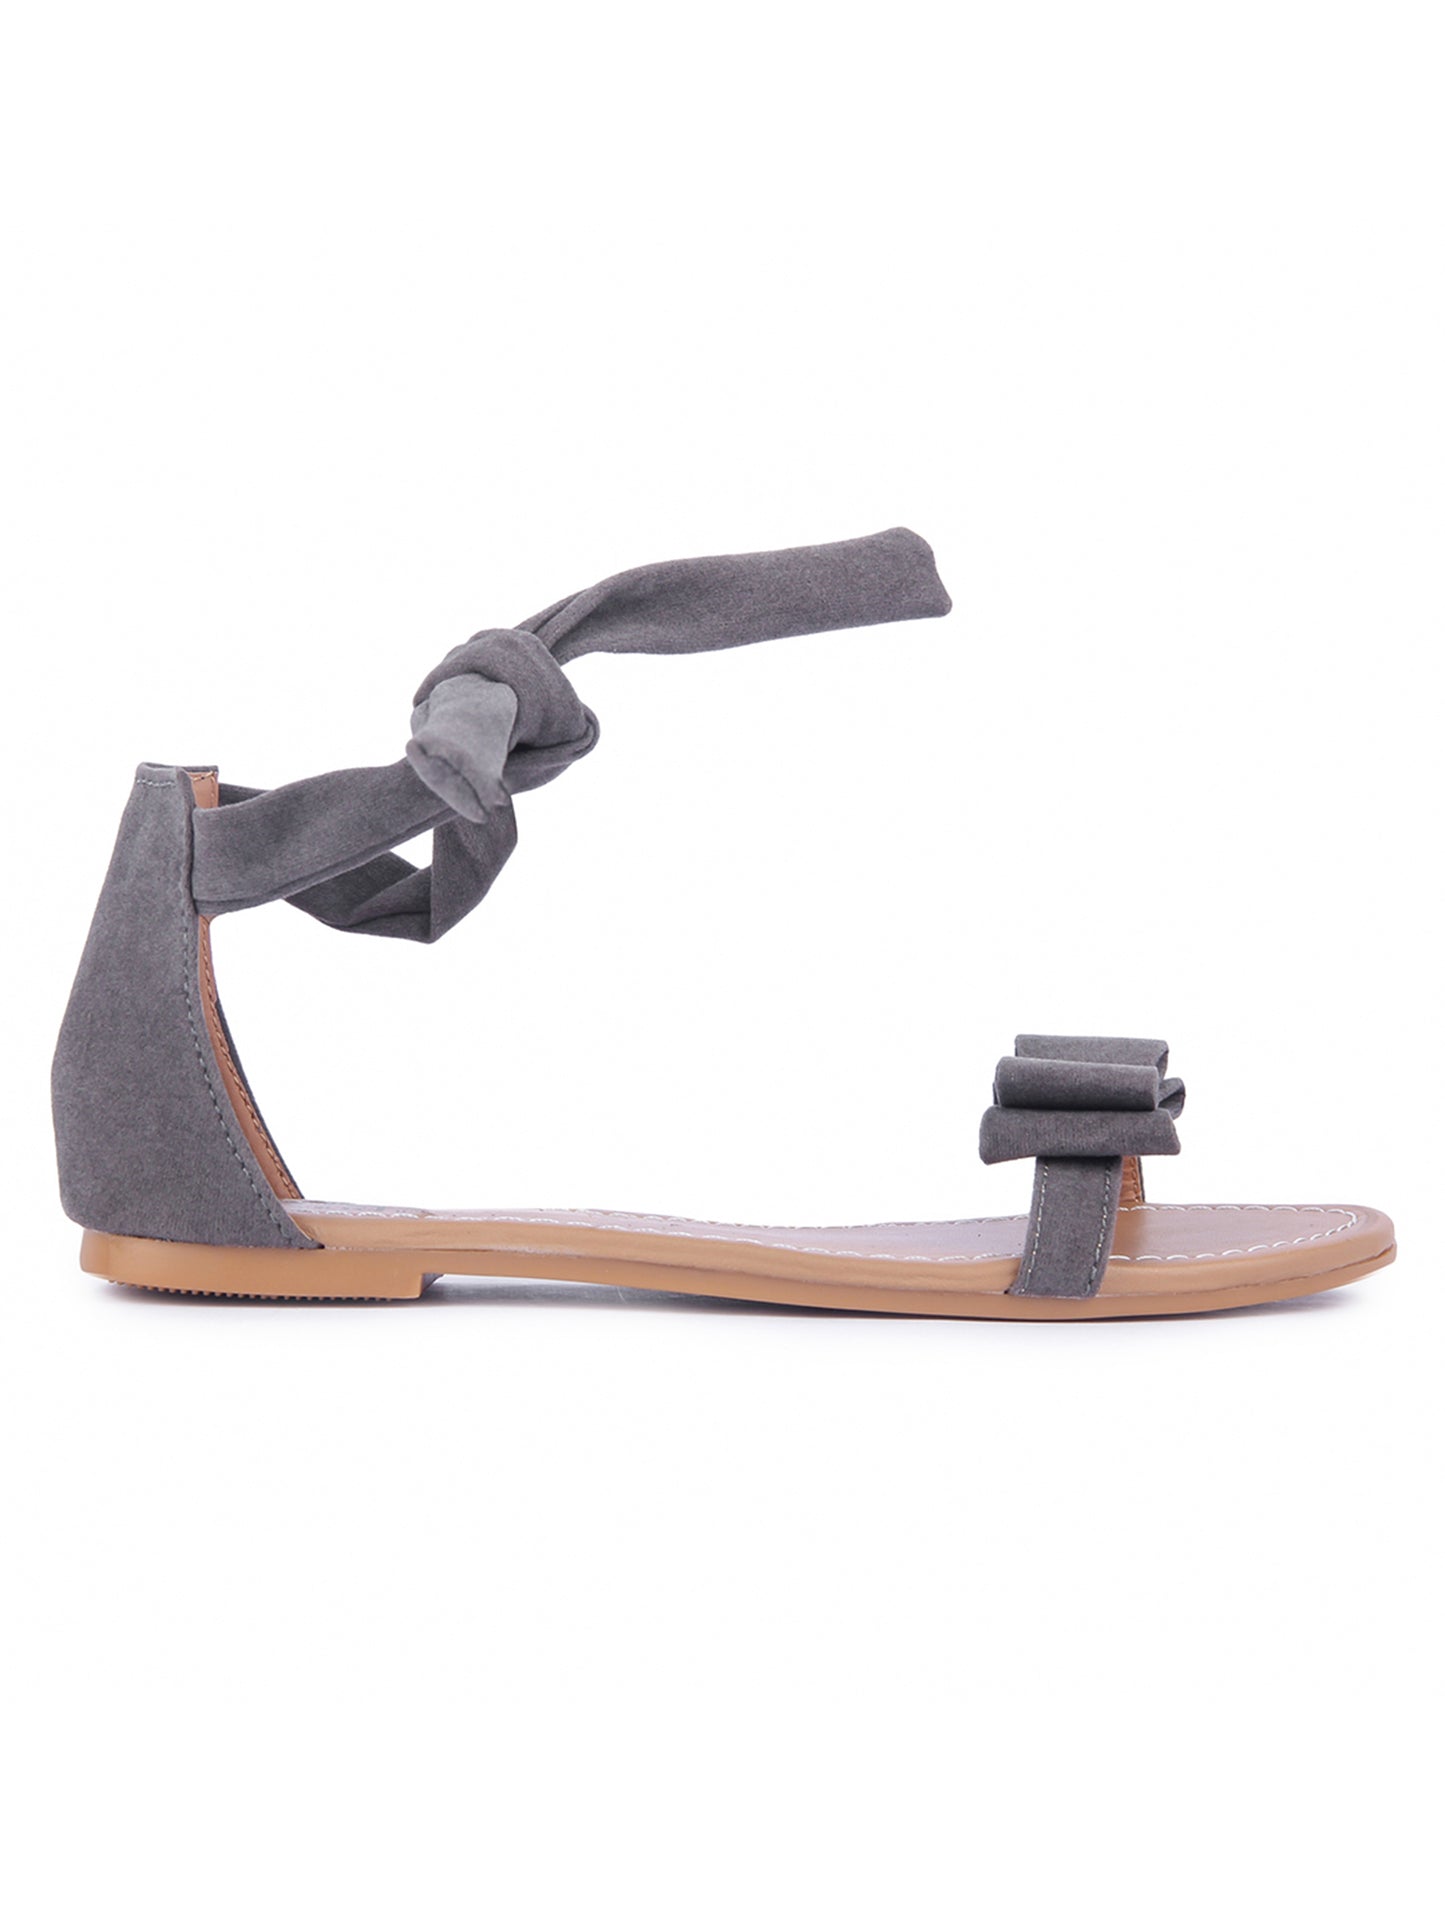 Women Grey Suede Bow Tie Up Fashion Sandal